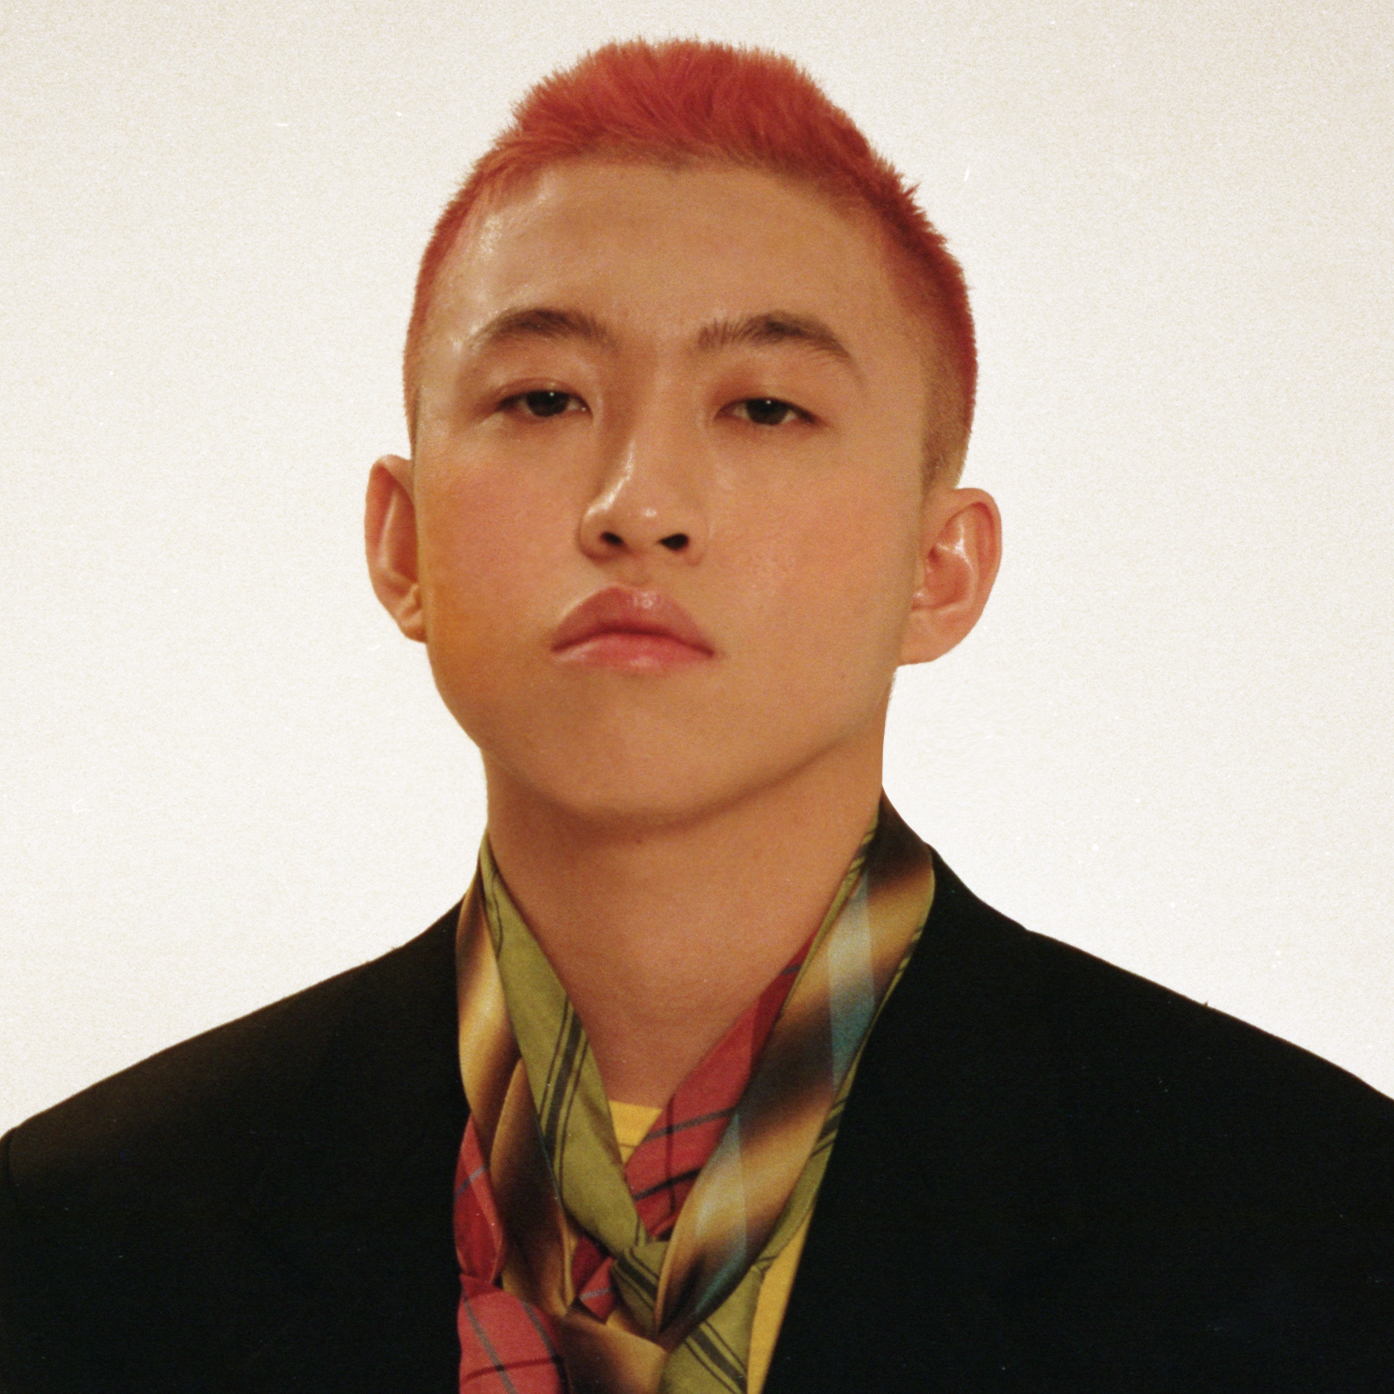 RICH BRIAN DROPS A SURPRISE NEW EP BRIGHTSIDE FEATURING “GETCHO MANS” WITH WARREN HUE & RECENT SINGLE “NEW TOOTH” CONFIRMED TO PERFORM AT COACHELLA